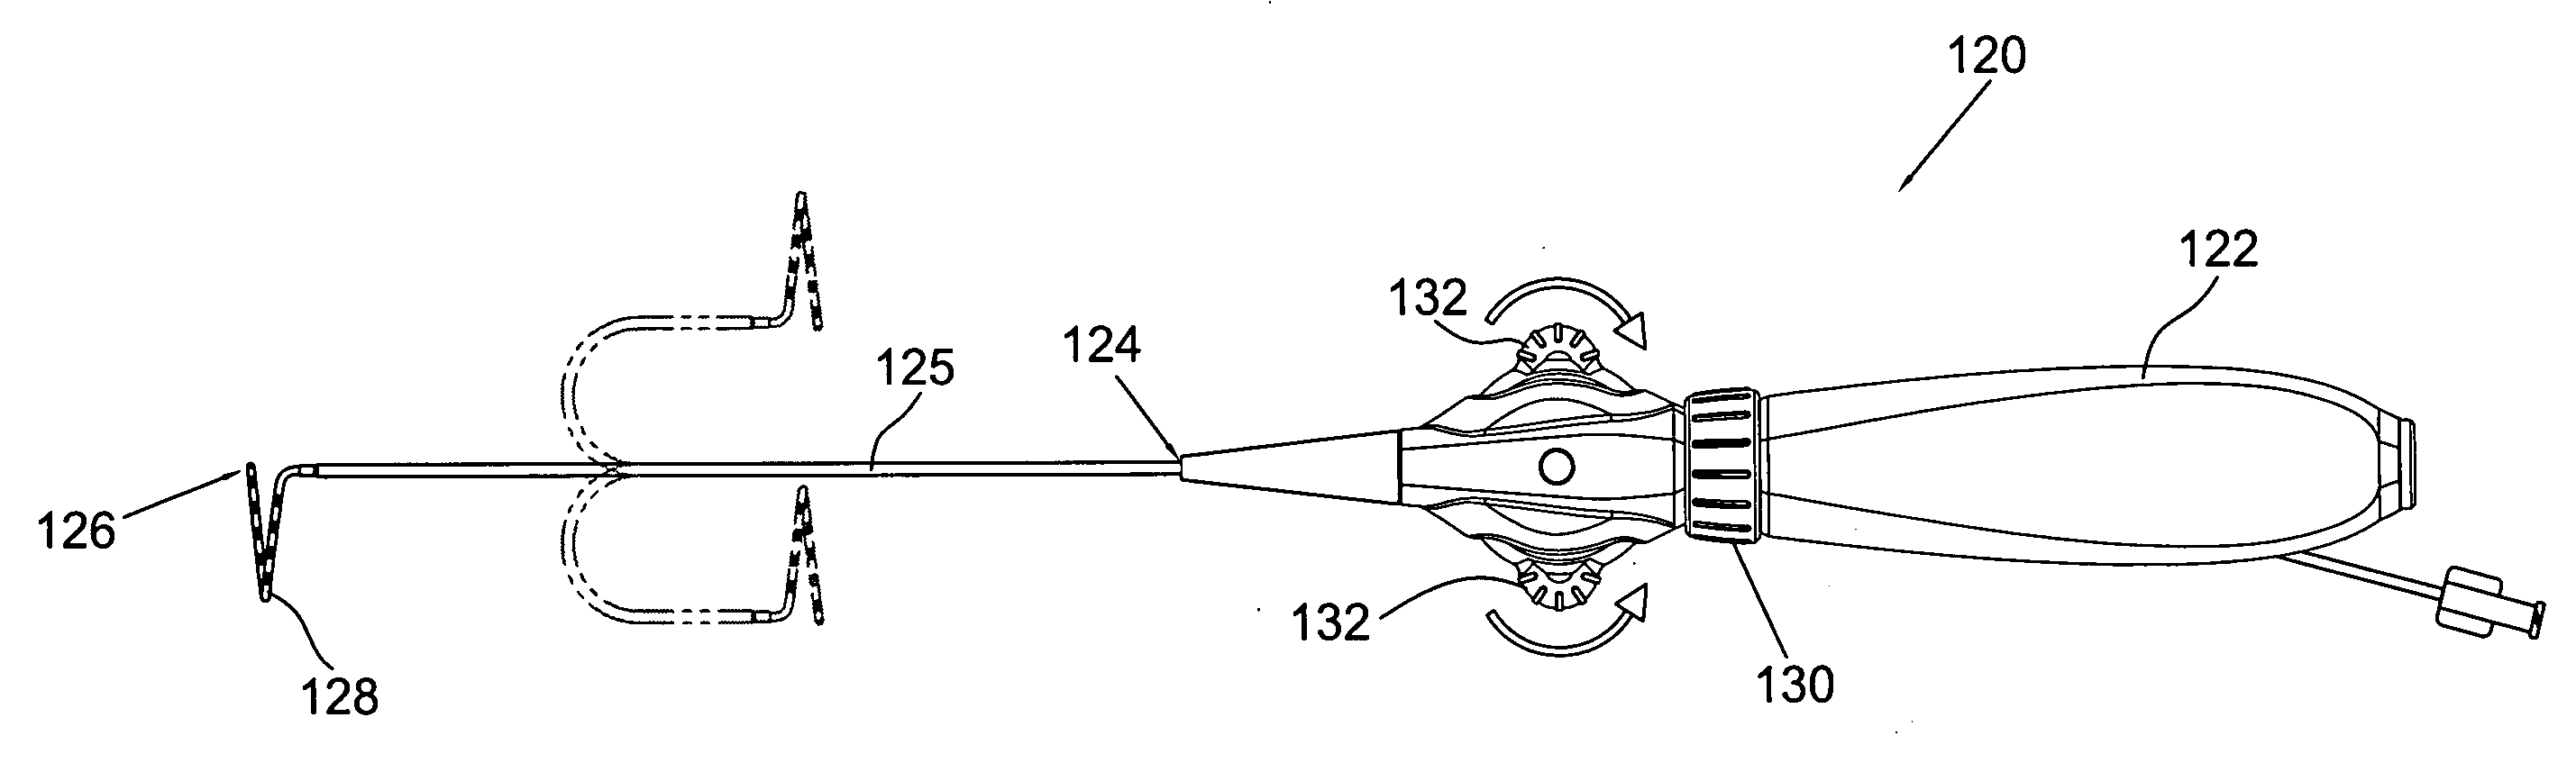 Irrigated ablation catheter with multiple segmented ablation electrodes